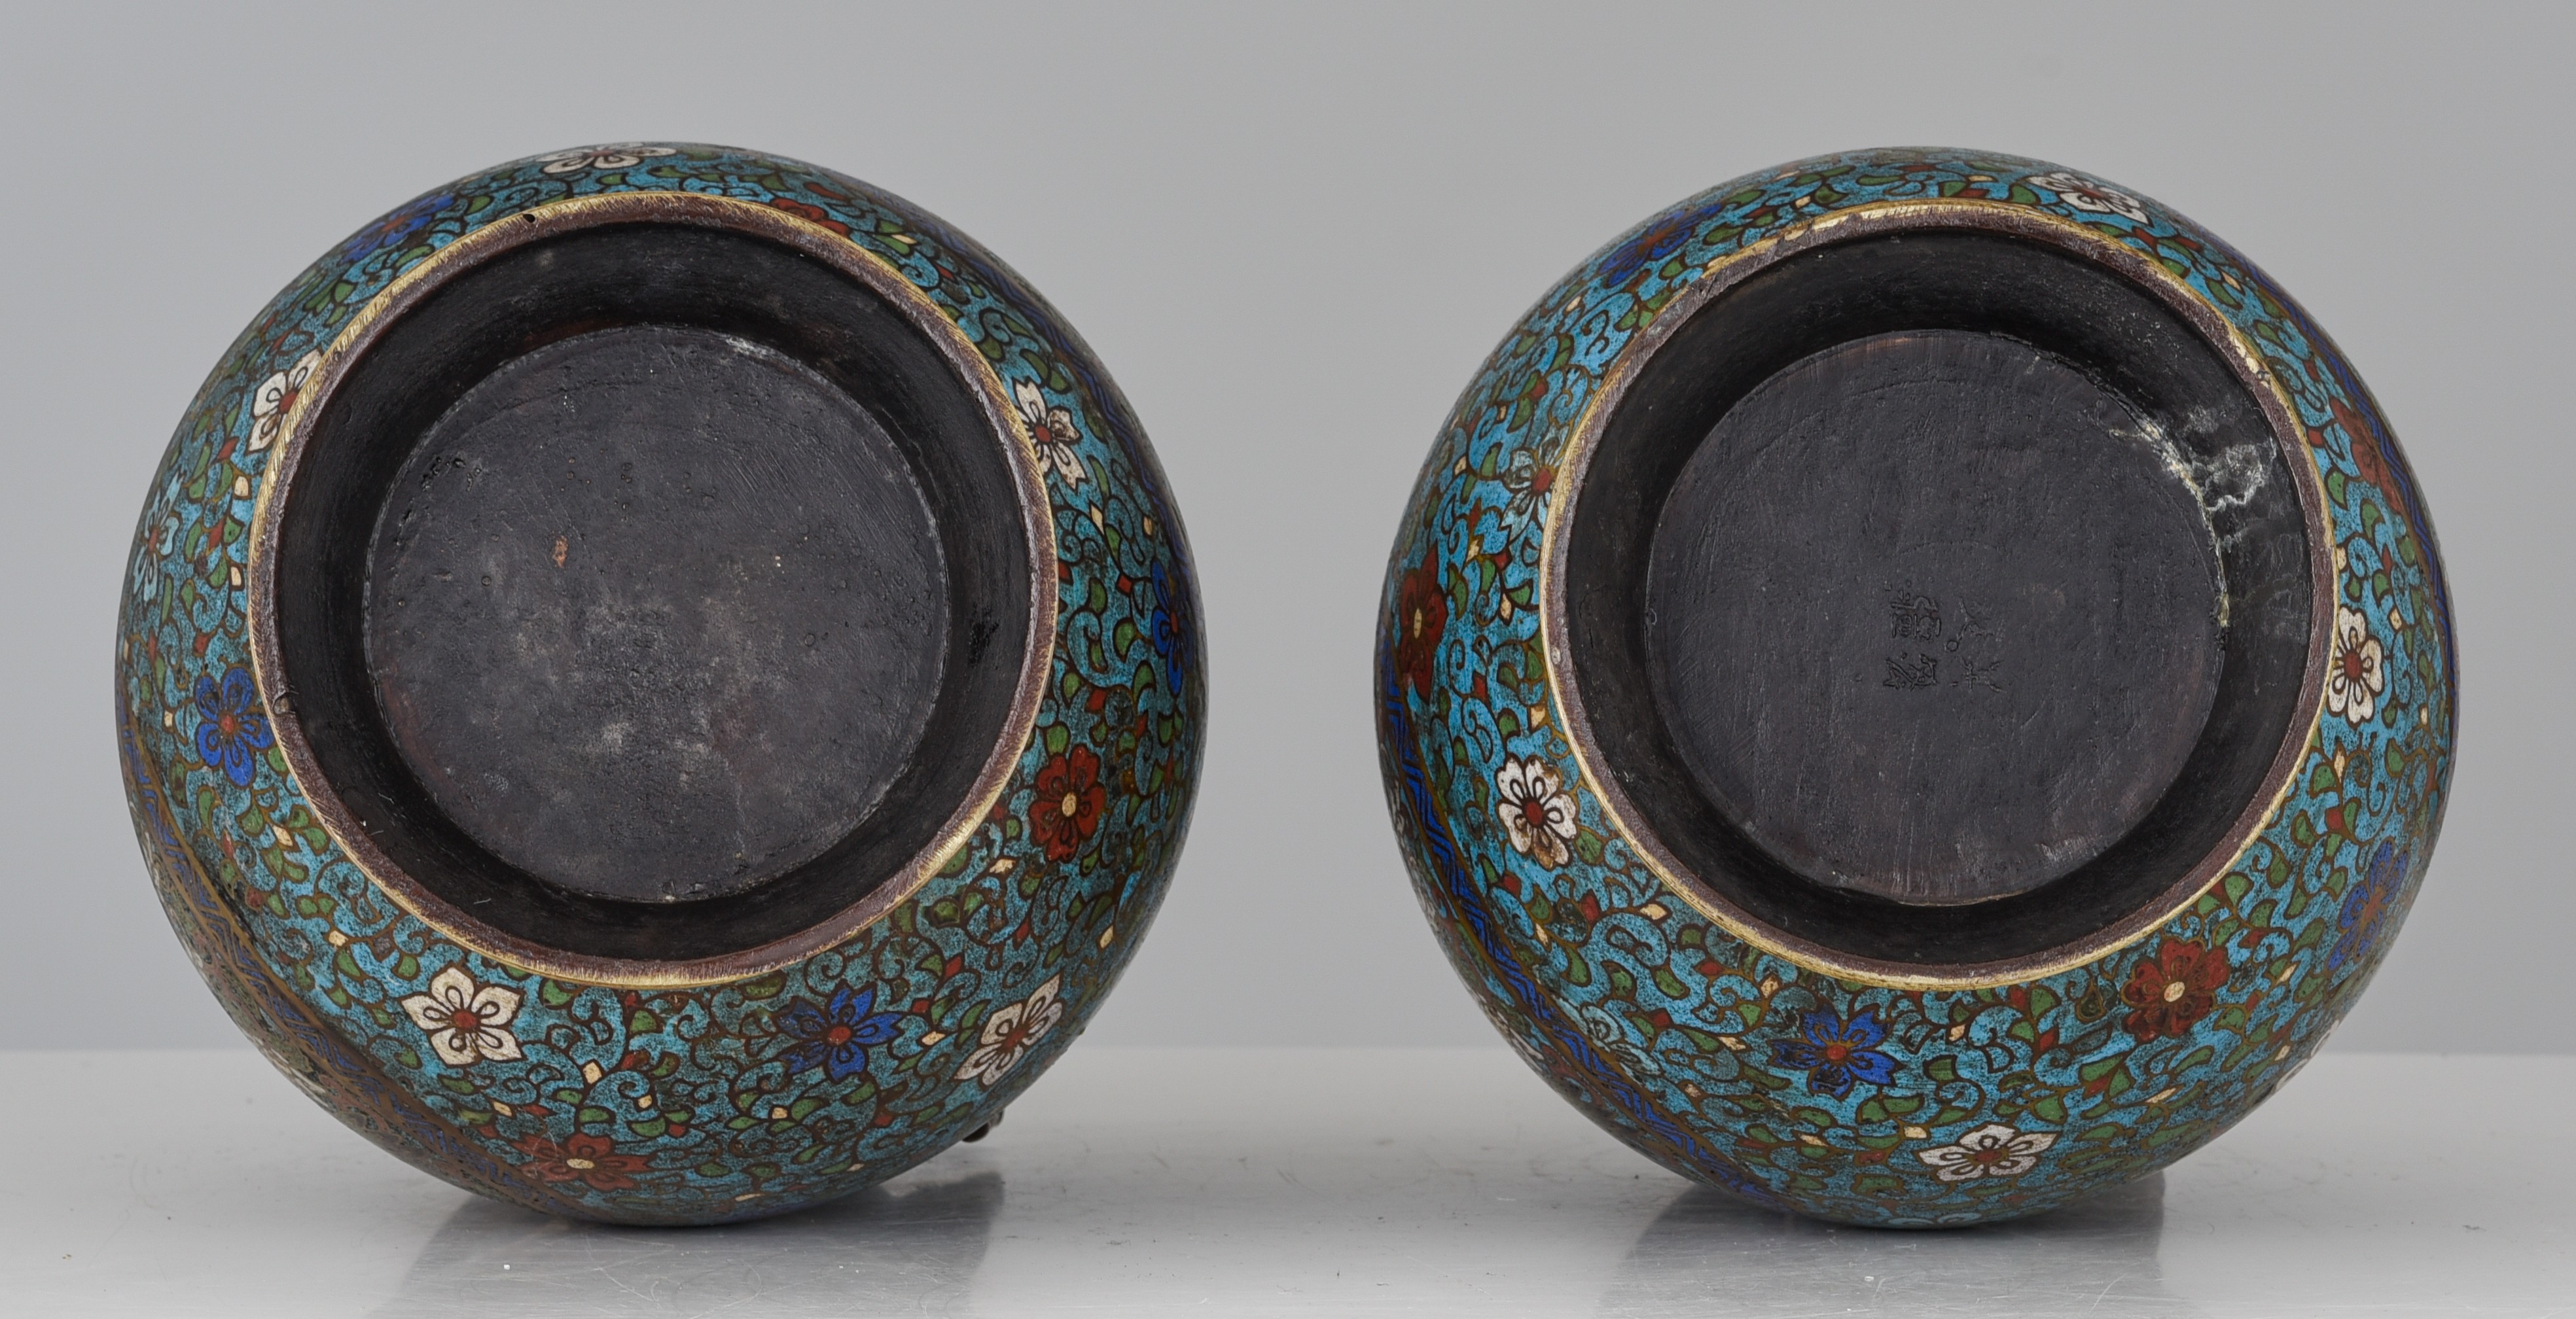 A pair of Japanese champleve bronze vases, 19thC/20thC, H 36 cm - Image 7 of 7